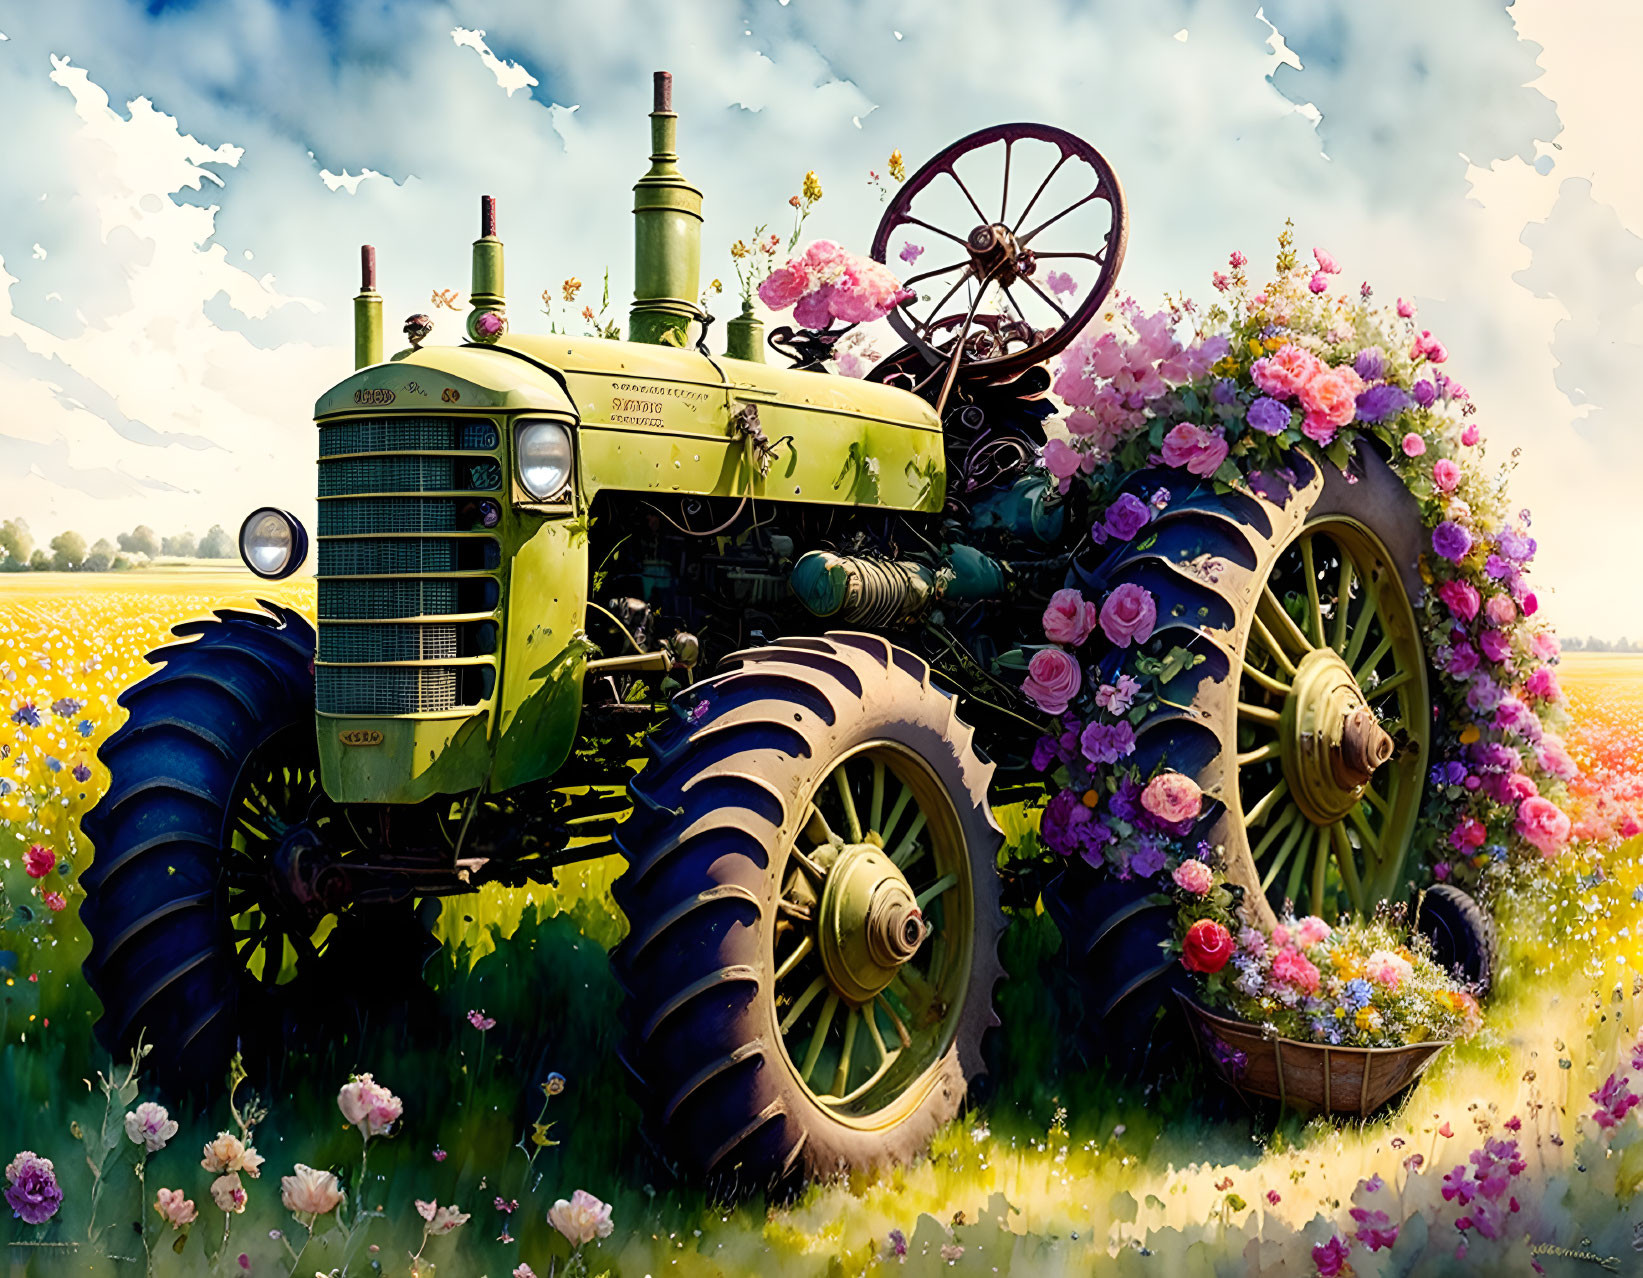 Old Green Tractor in Vibrant Flower Field under Blue Sky